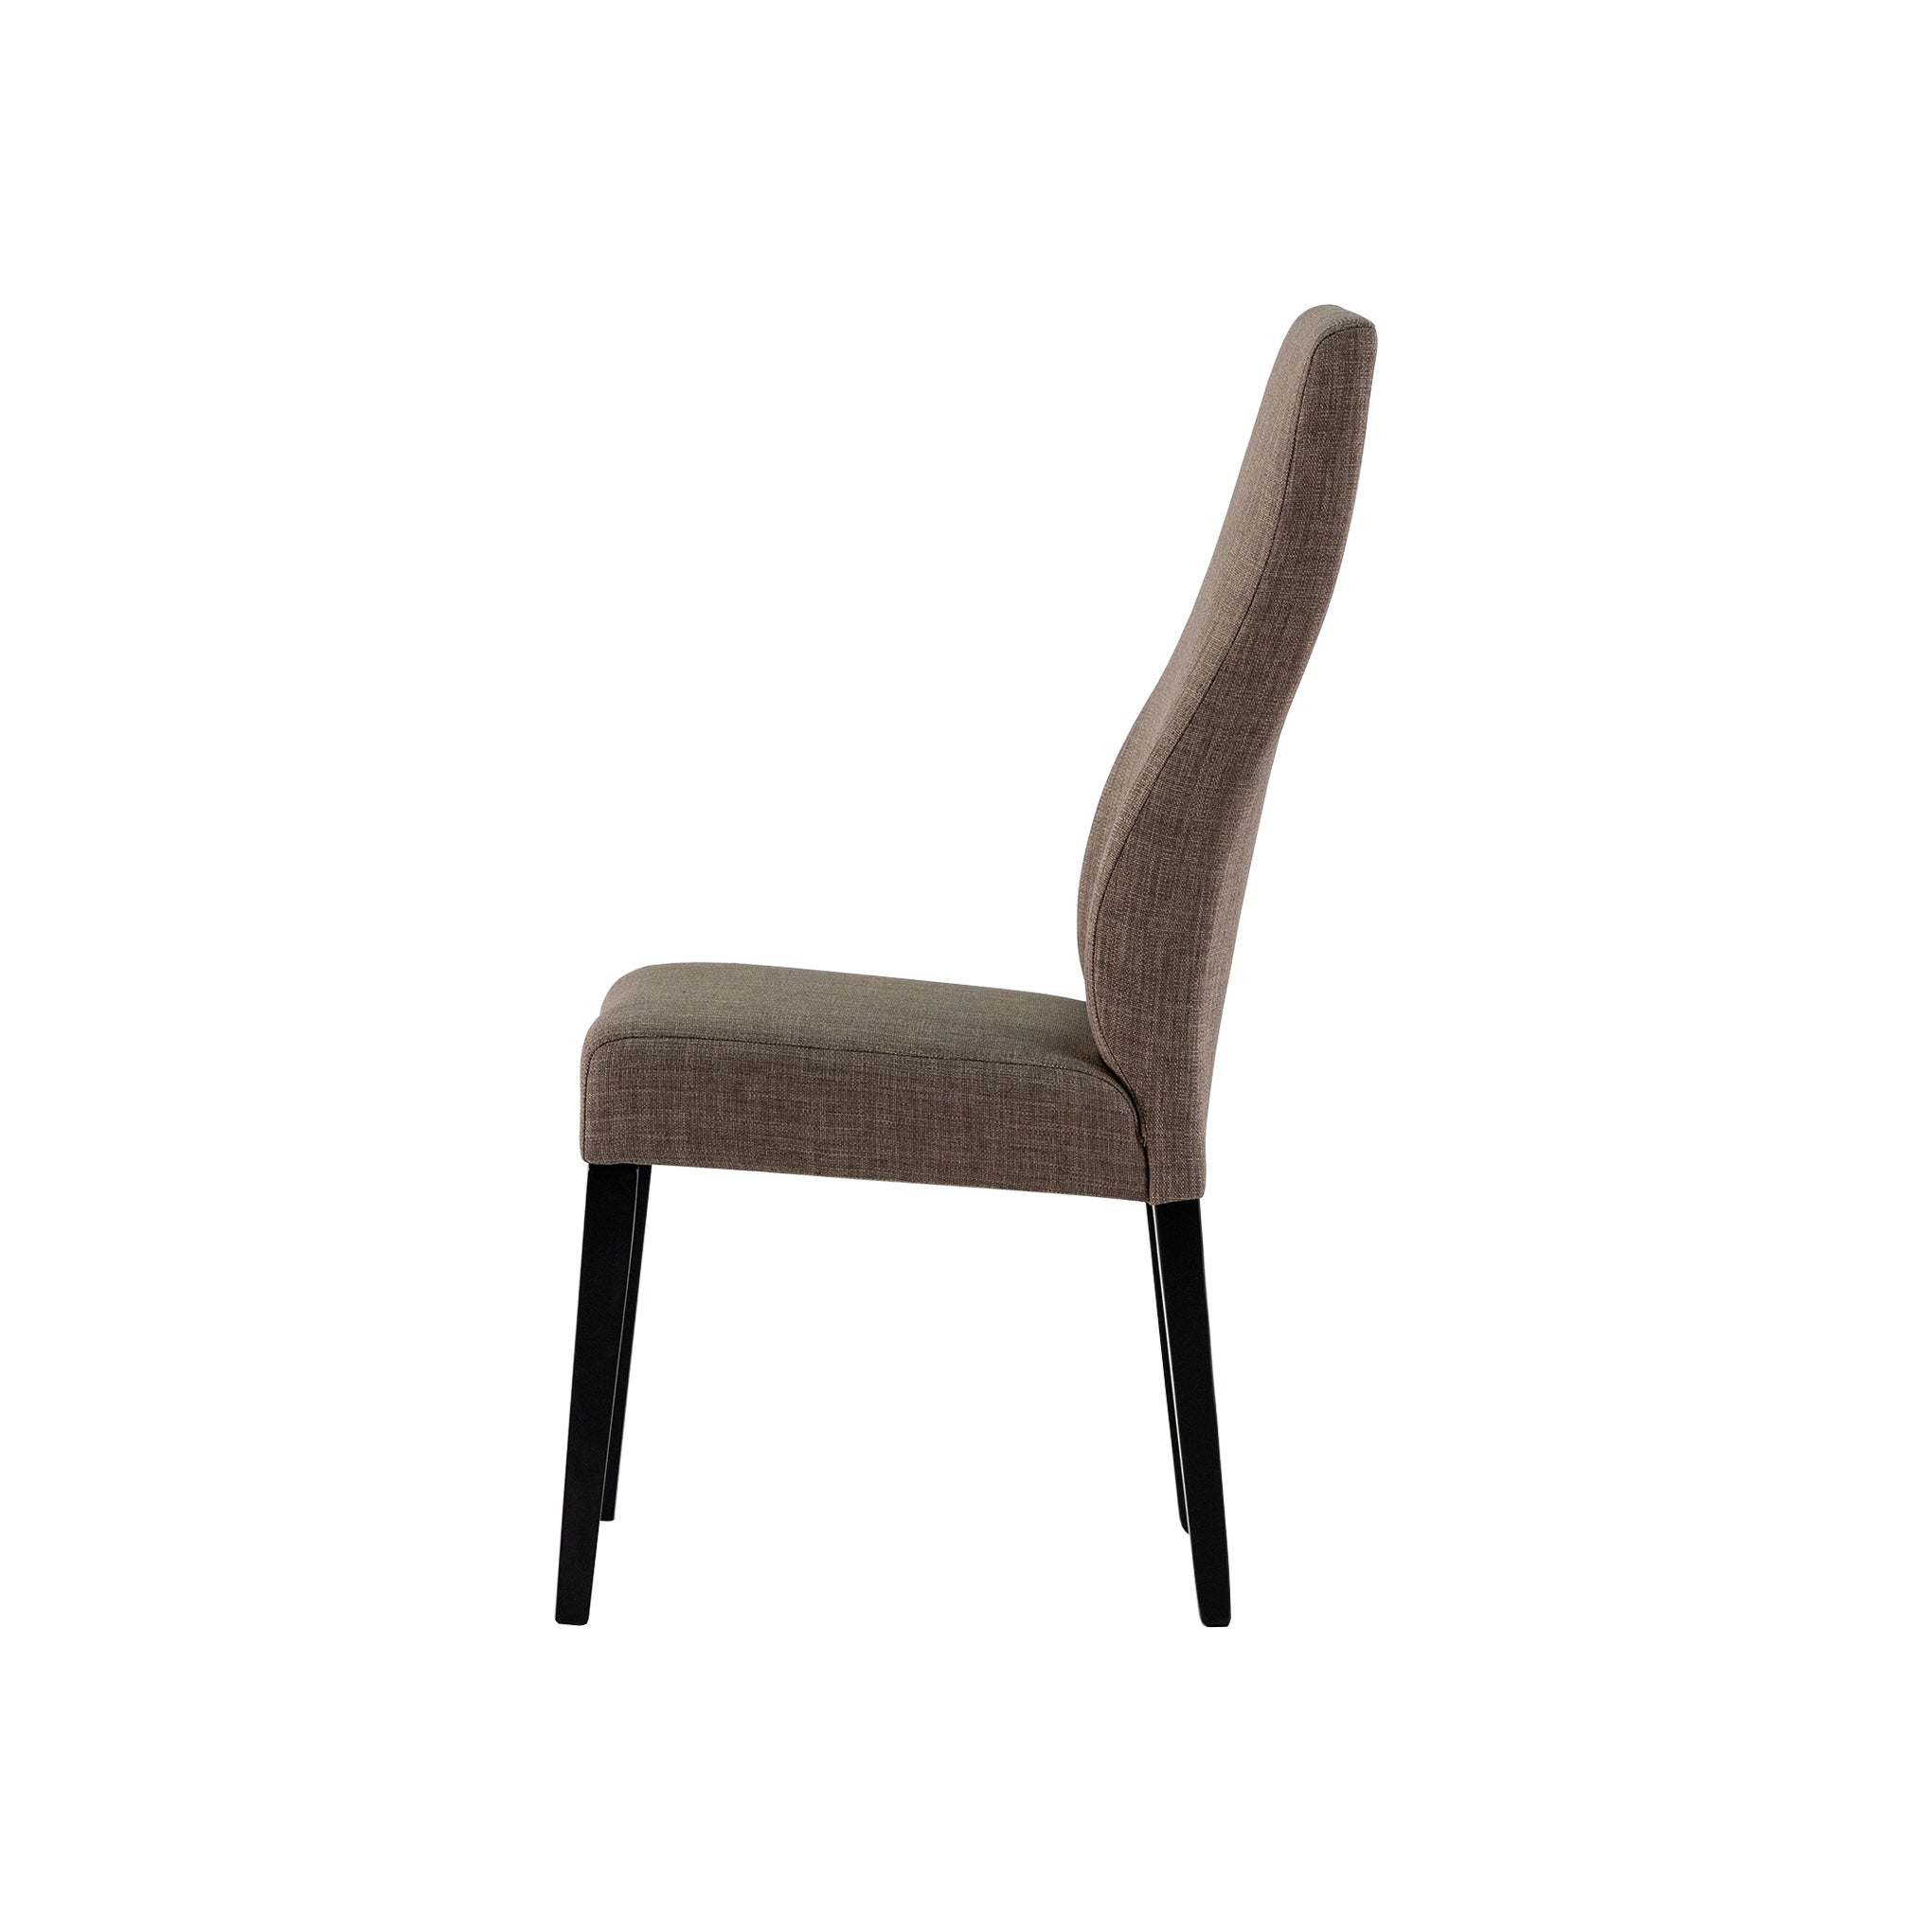 Ines Dining Chair With Cushion Seat